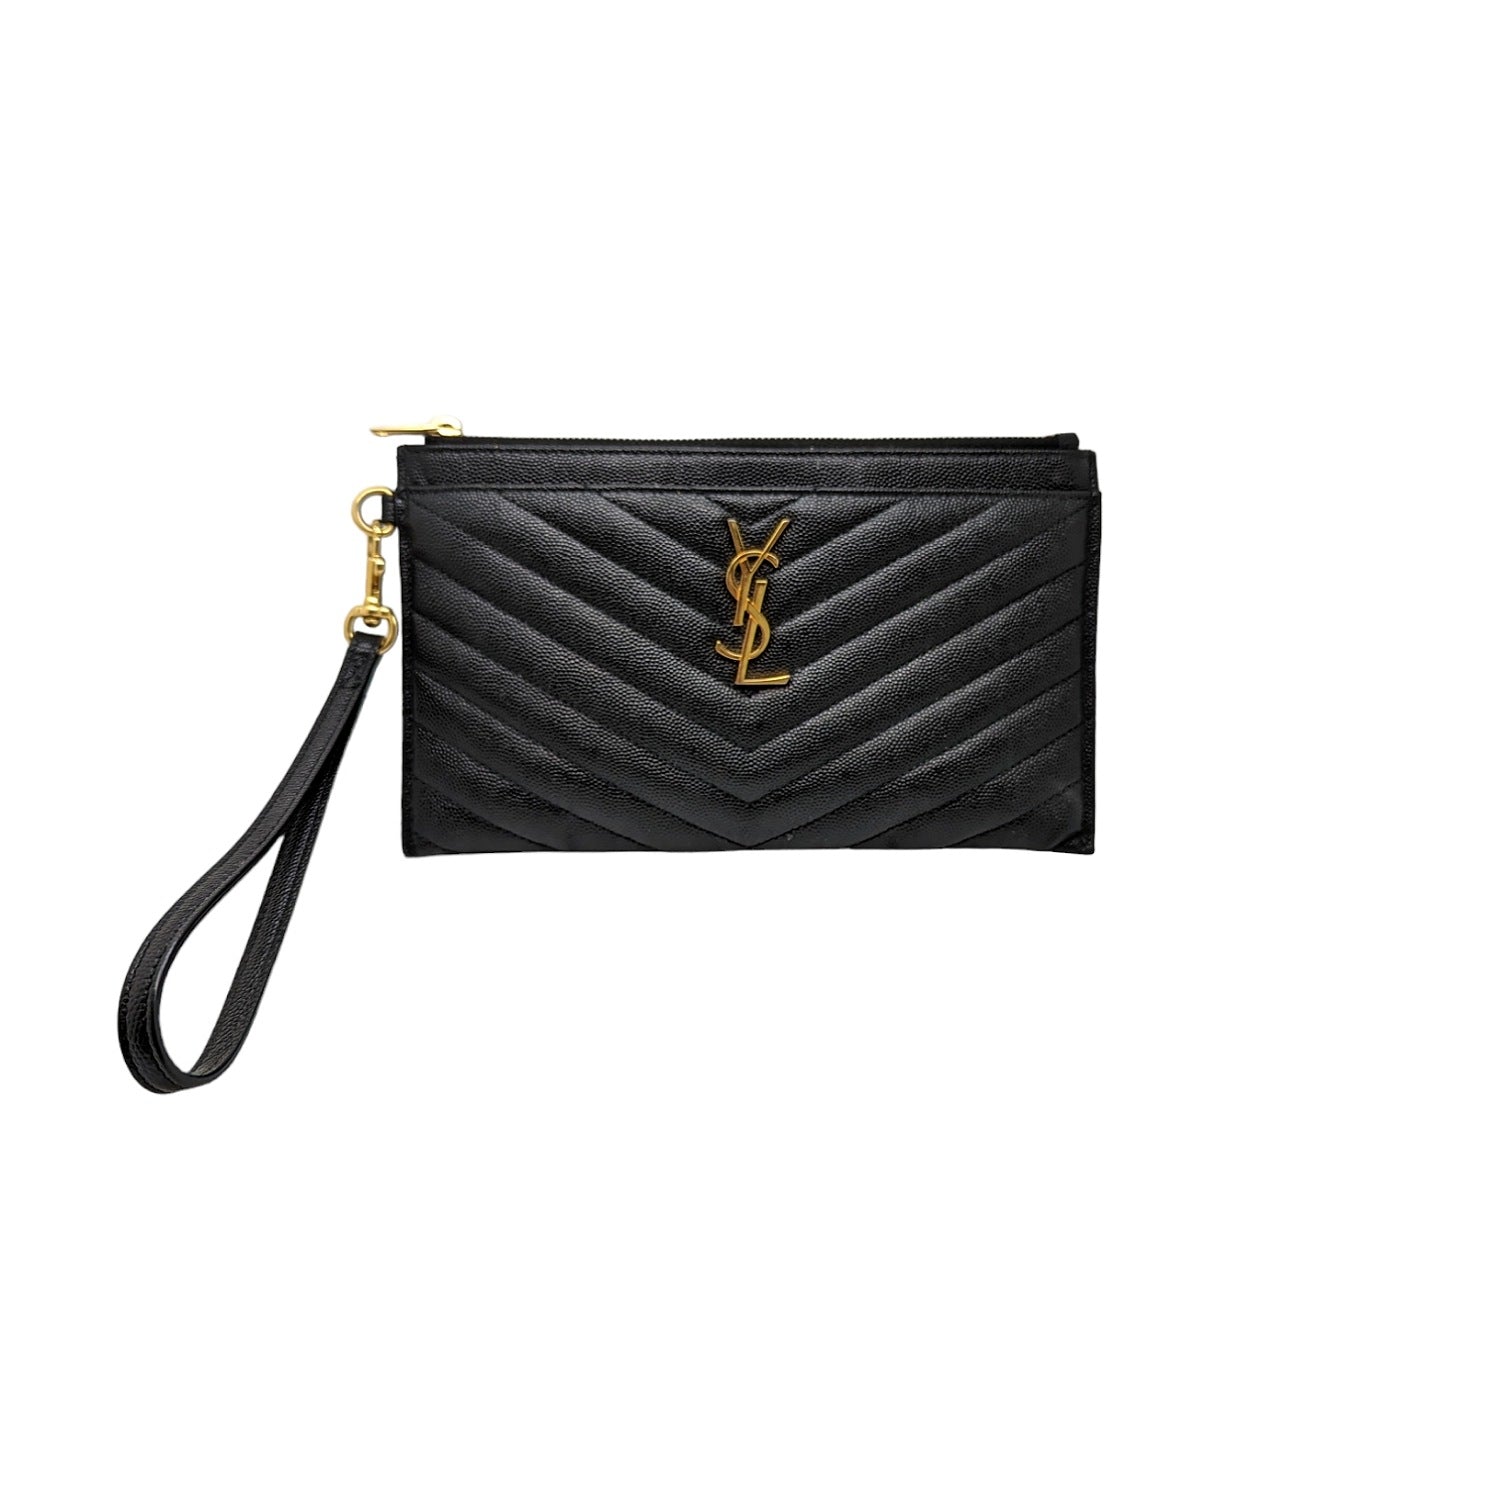 YSL SAINT LAURENT BILL POUCH REVIEW II WHAT CAN FIT II WORTH THE MONEY? 